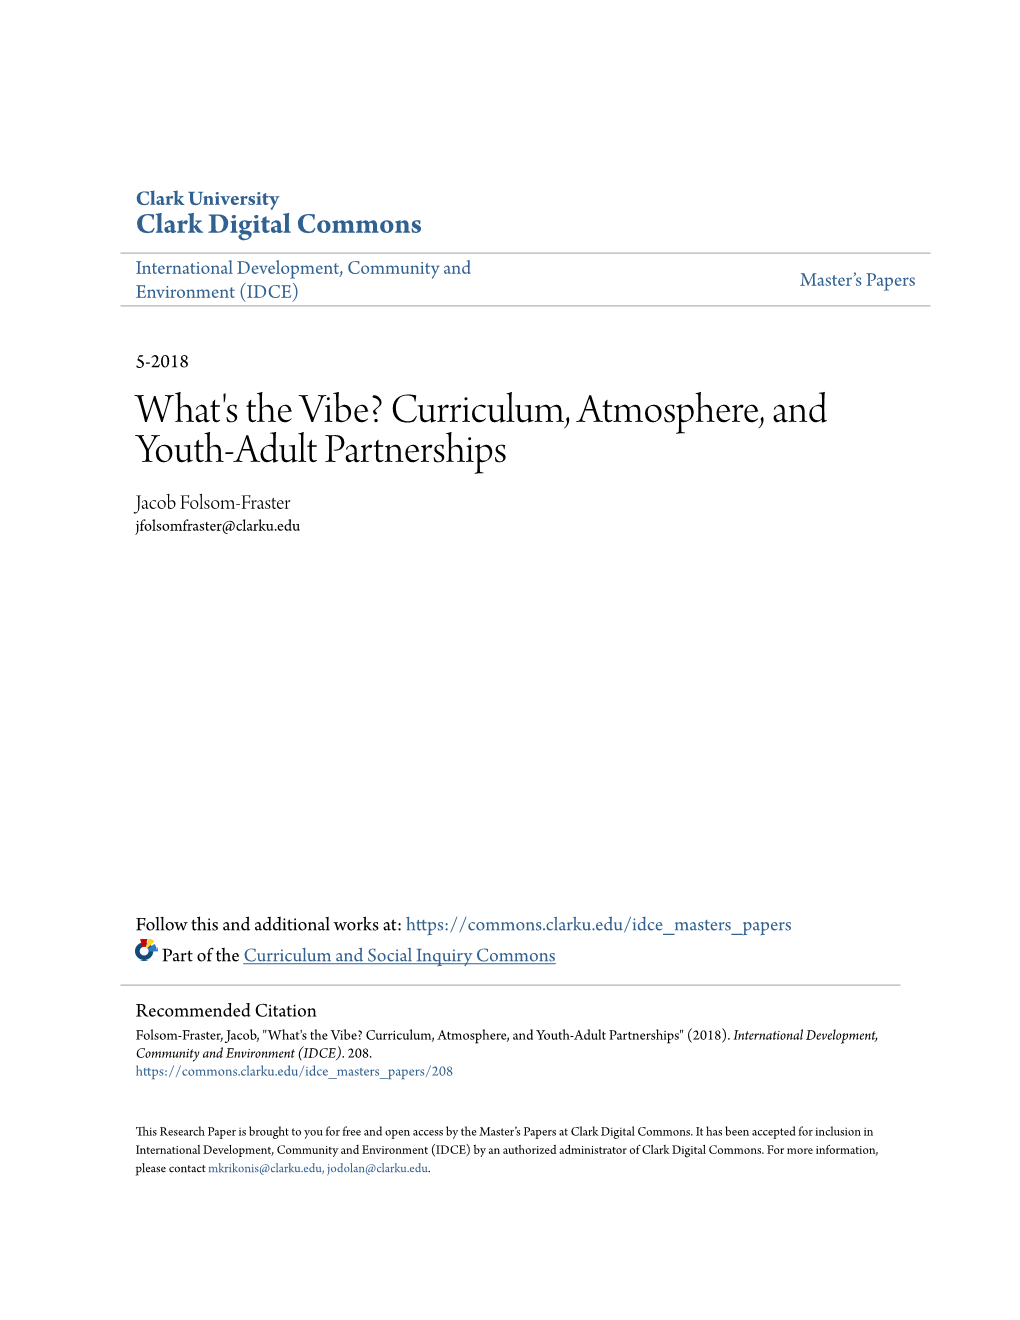 What's the Vibe? Curriculum, Atmosphere, and Youth-Adult Partnerships Jacob Folsom-Fraster Jfolsomfraster@Clarku.Edu